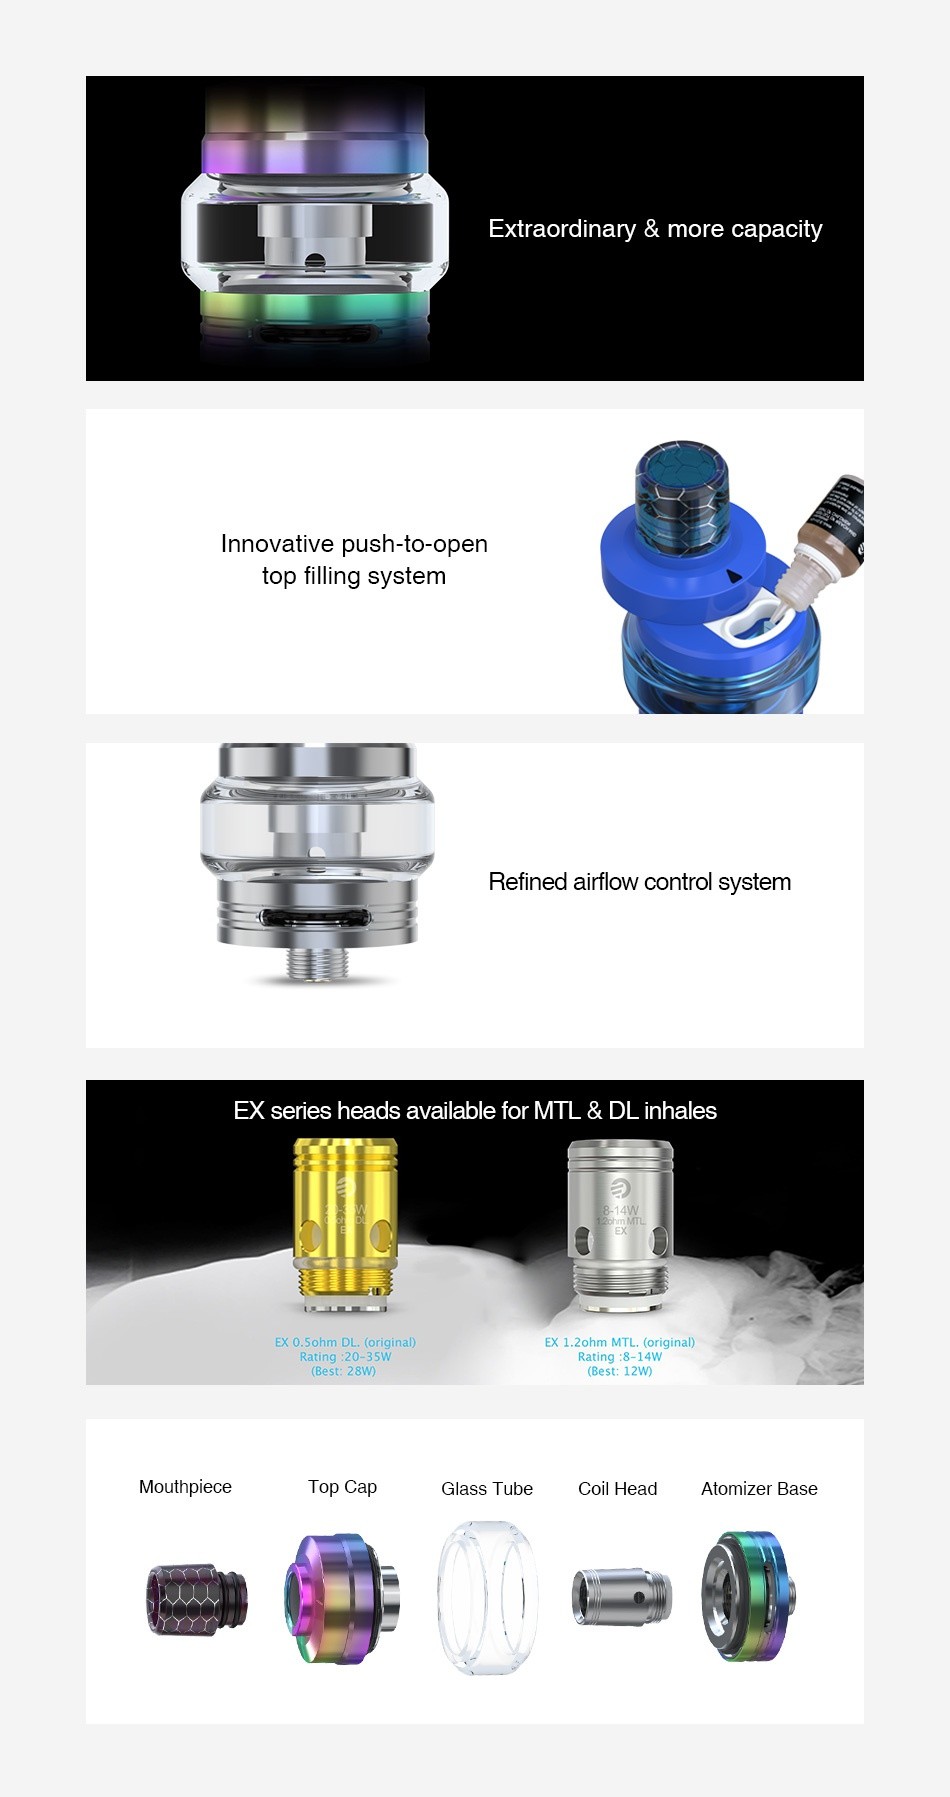 Joyetech Exceed Air Plus Atomizer 3ml Extraordinary more capacity Innovative push to open top filling system Refined airflow control system EX series heads available for mtl dl inhales EX 0  Sohm DL   origina EX 1ohm MTL   original  Rating  20 35W Rating 8 14W  Best  28W Best  12W  Mouthpiece Top Cap Glass Tube Atomizer Base